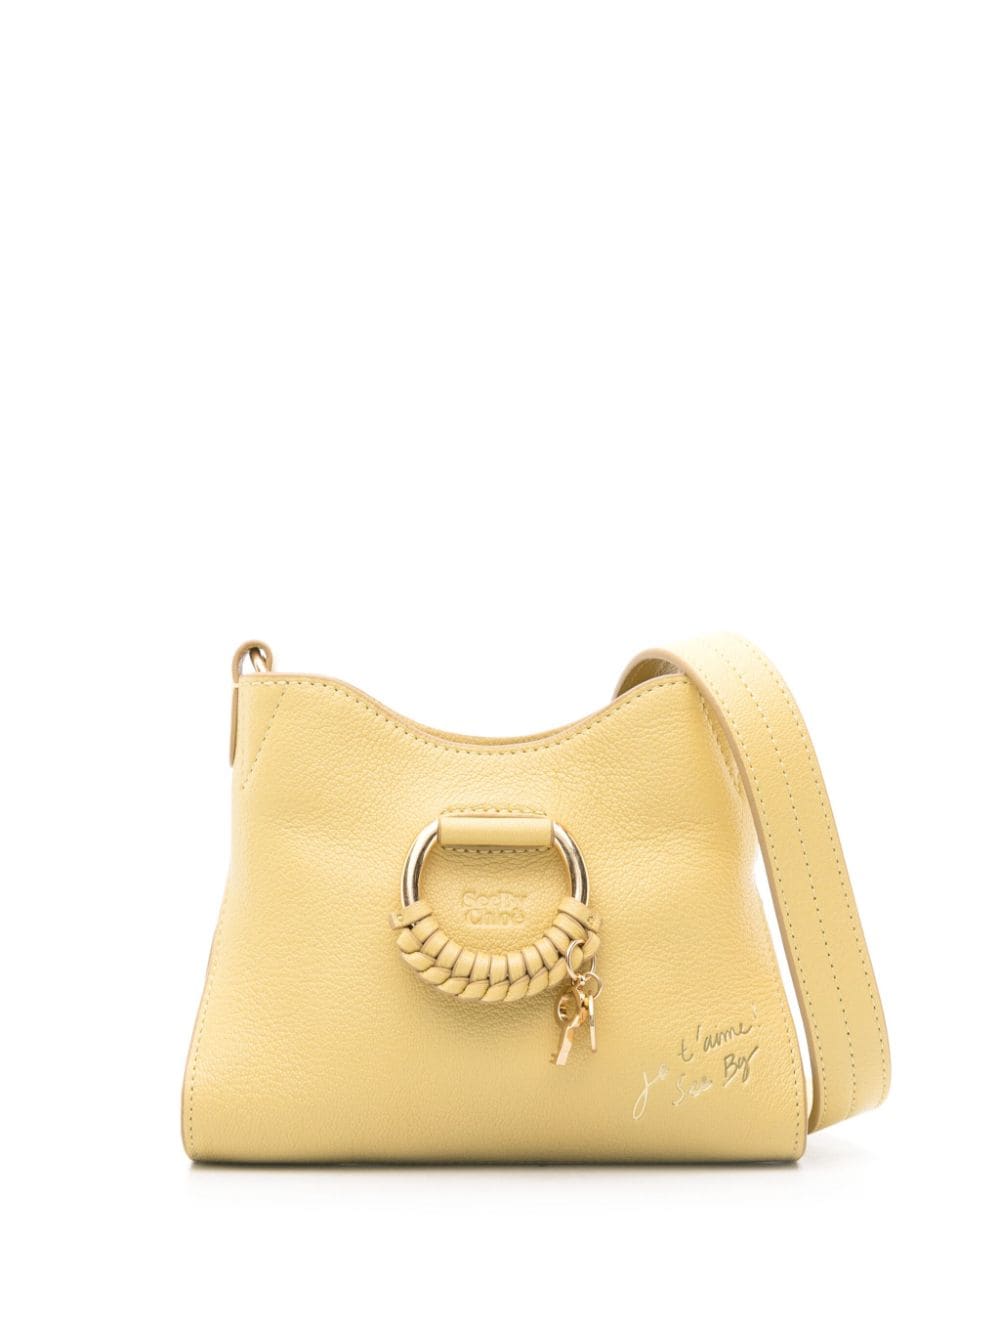 See by Chloé mini Joan leather shoulder bag - Green von See by Chloé